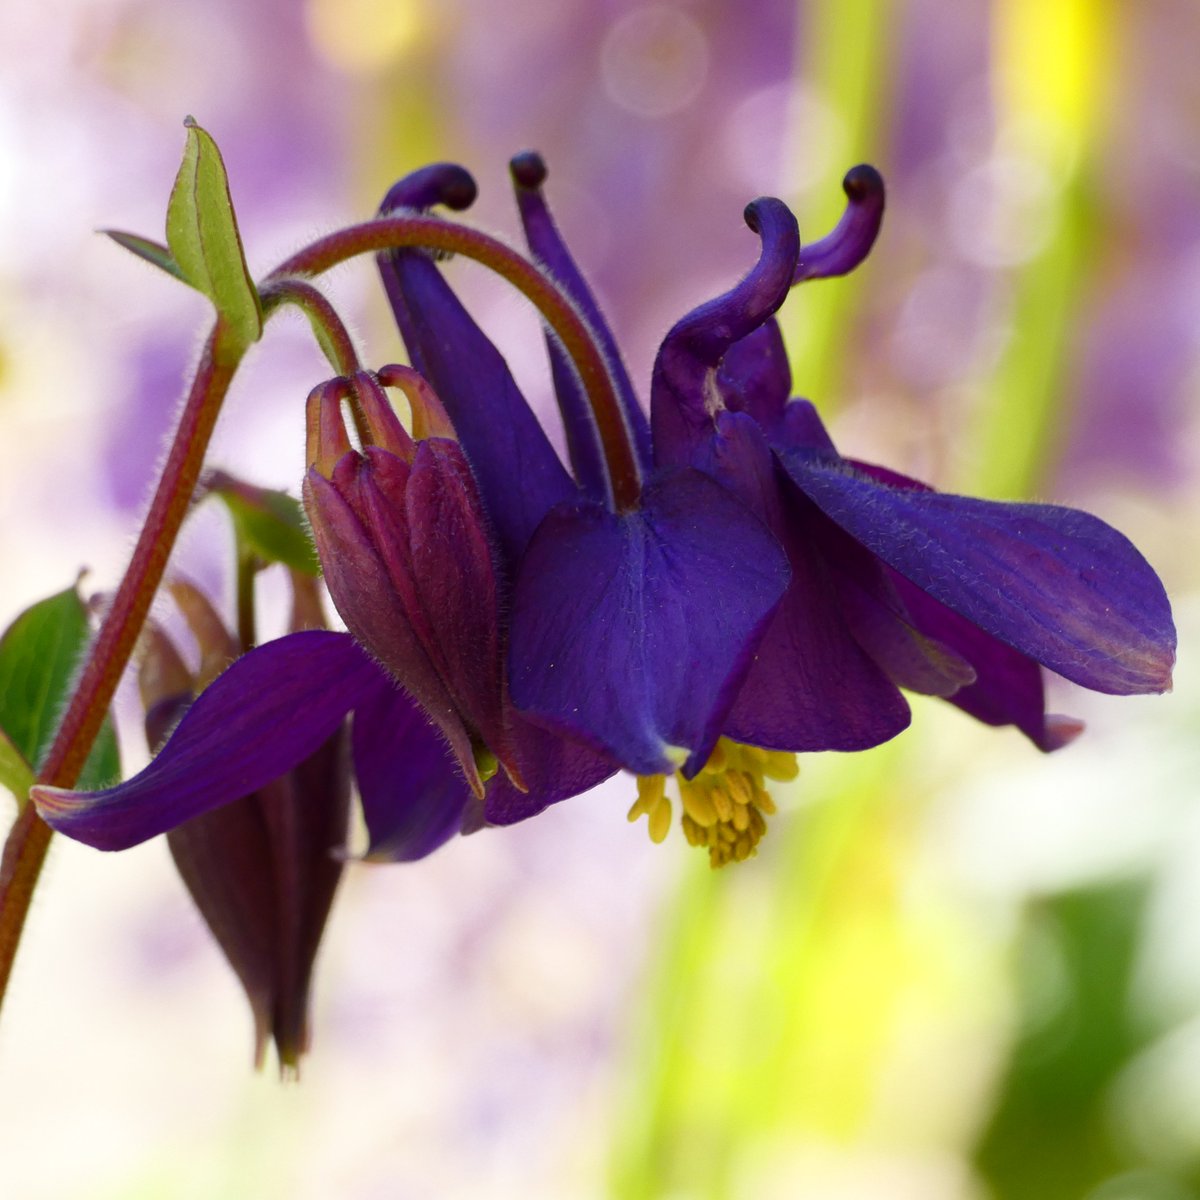 #Columbine, a name so quaint,
Looks like birds in a lovely paint.
Spurs for necks and petals for wings,
#Nature's talent in little things.

🌼🌸

#NaturePhotography #NaturePhoto #photography #flowers #FlowerPhotography #naturesbeauty #NaturalBeauty #Aquilegia #花 #景色 #オダマキ